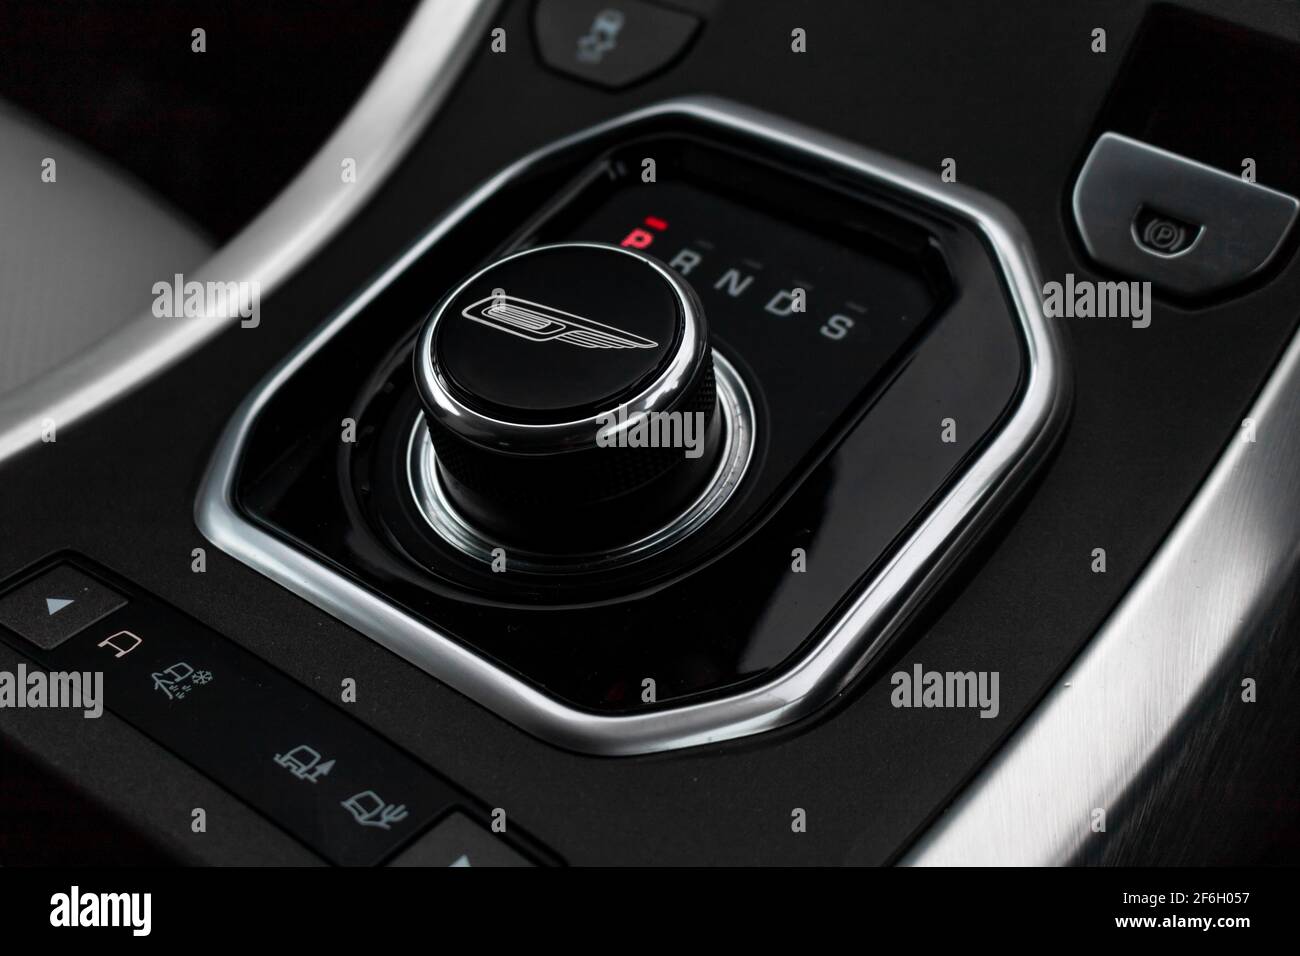 https://c8.alamy.com/comp/2F6H057/an-automatic-gear-stick-inside-the-2017-land-rover-range-rover-evoque-with-gloss-black-overfinch-gear-selector-with-overfinch-logo-2F6H057.jpg